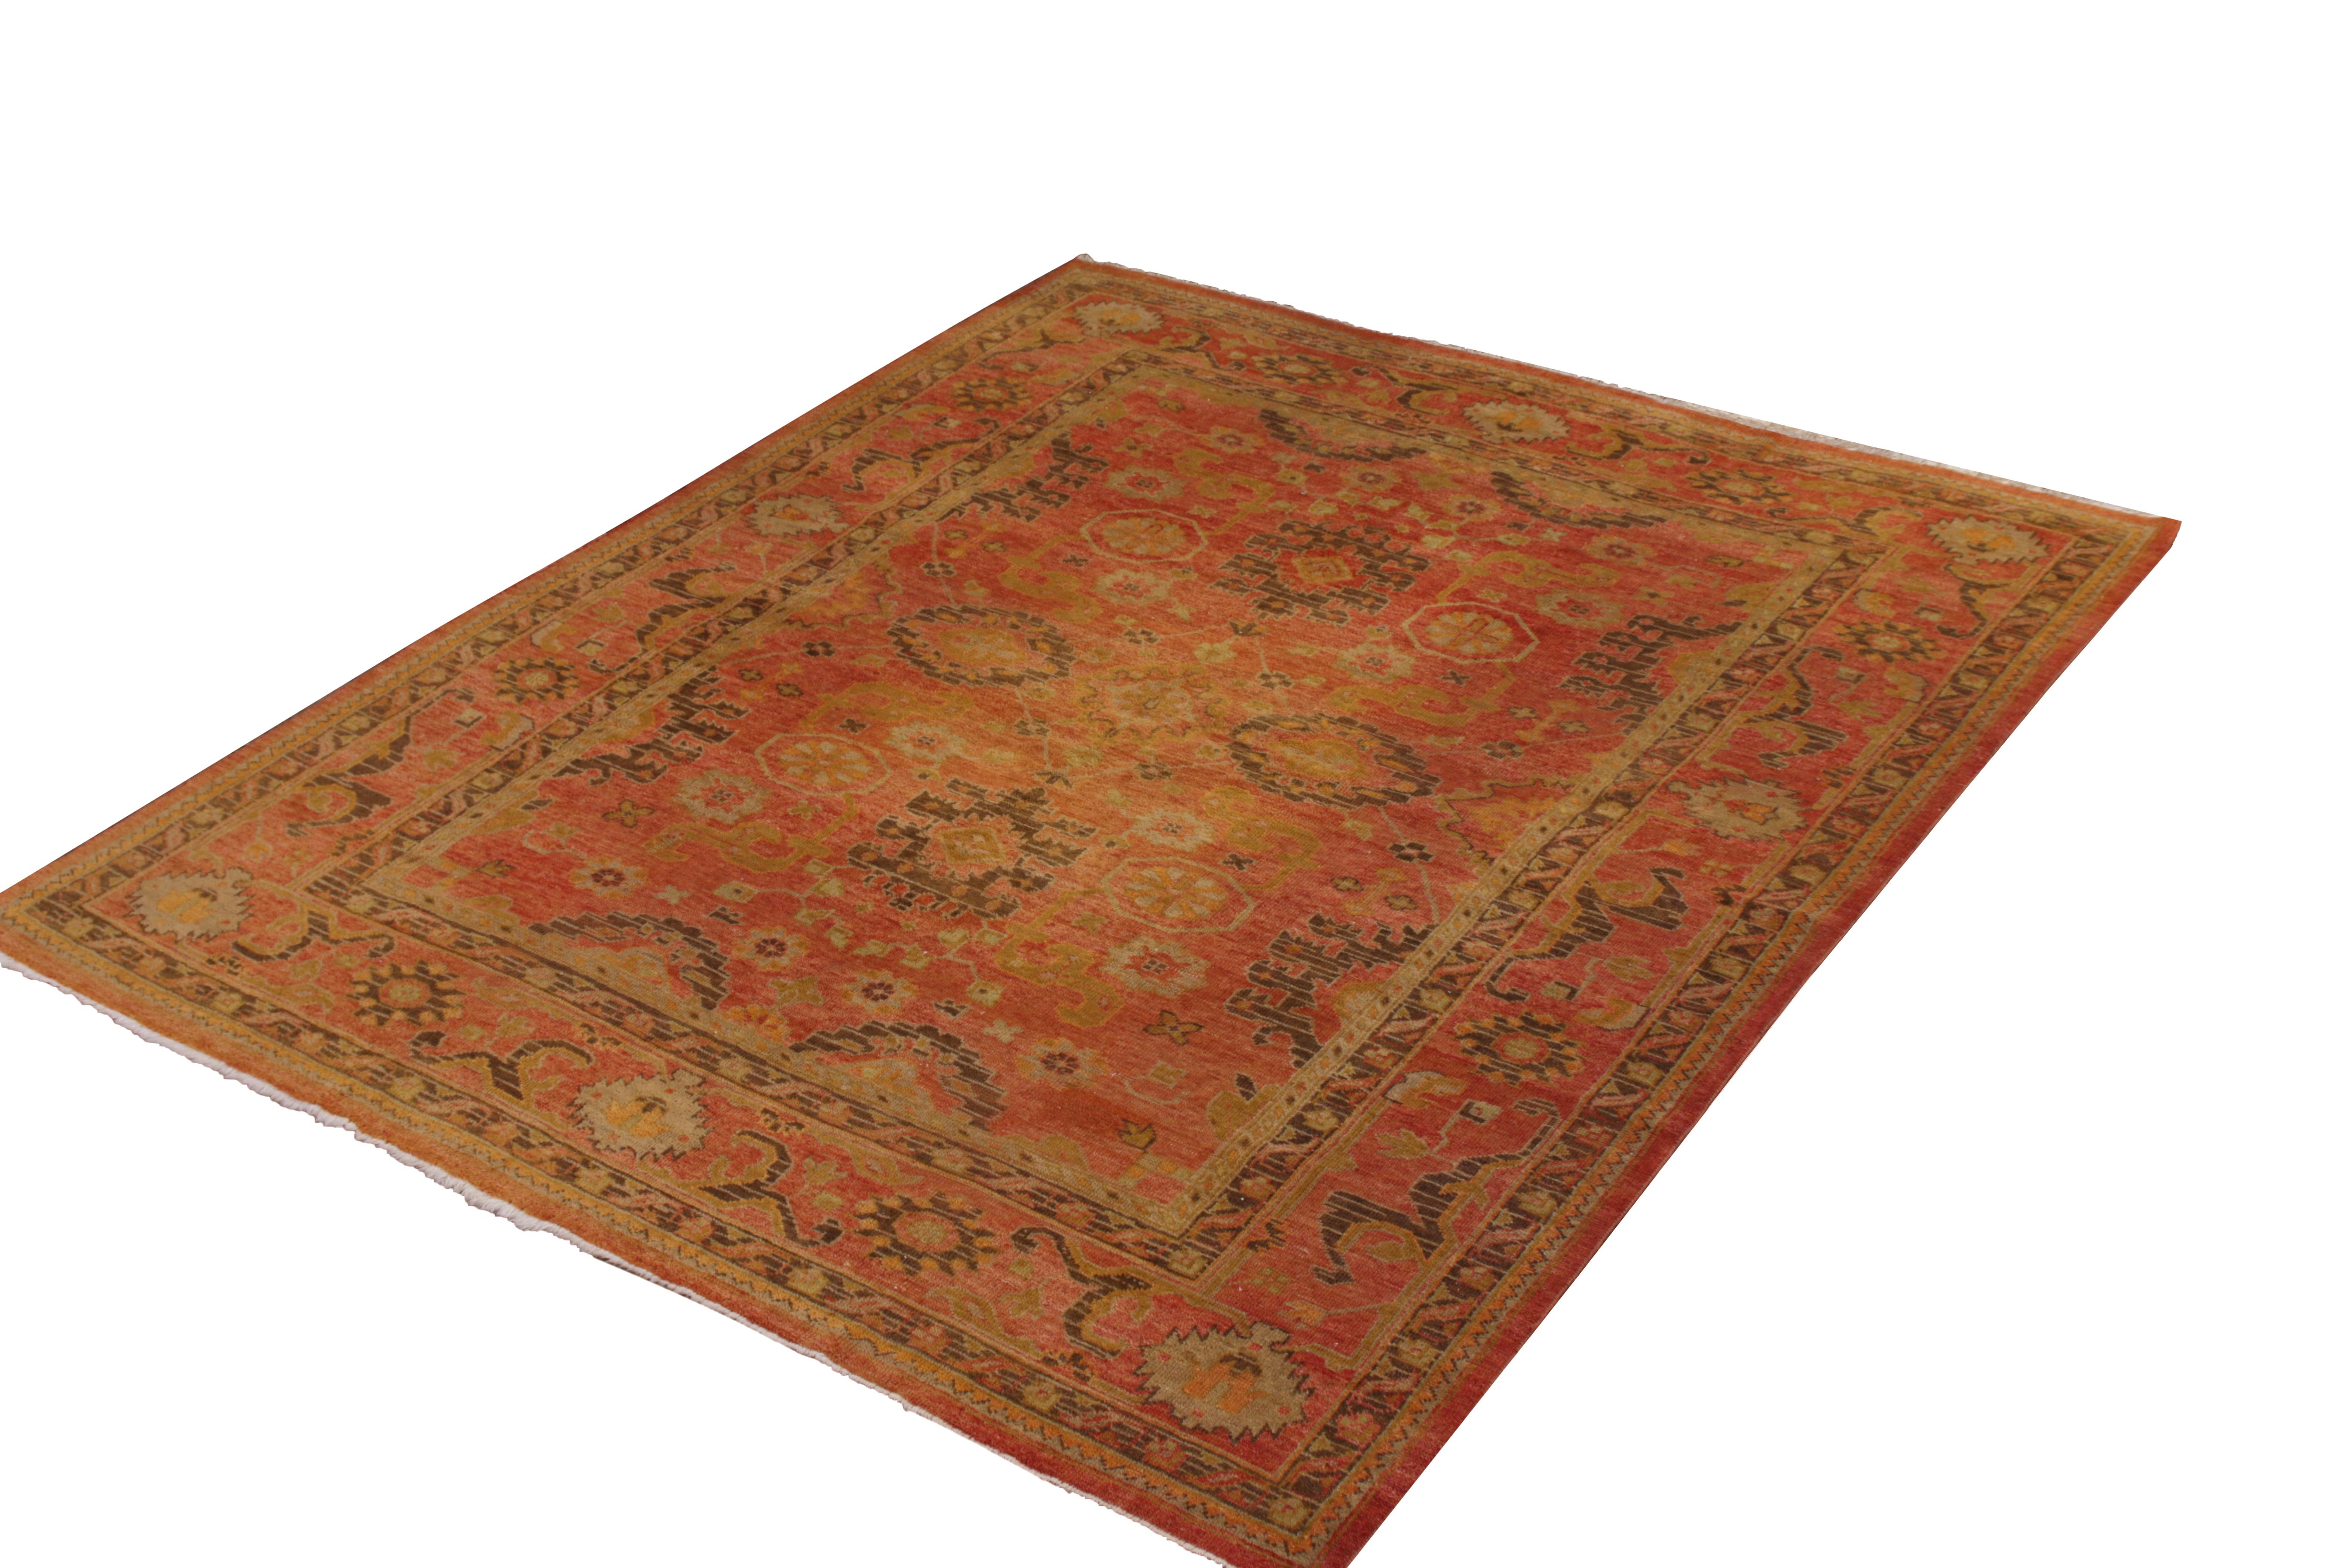 Hand knotted in wool originating from Turkey circa 1950-1960, this vintage Oushak rug enjoys a distinctively appealing, rich red colorway with a subtle pink accent, a warmer variation of this celebrated hue lending a warm complement to the rich